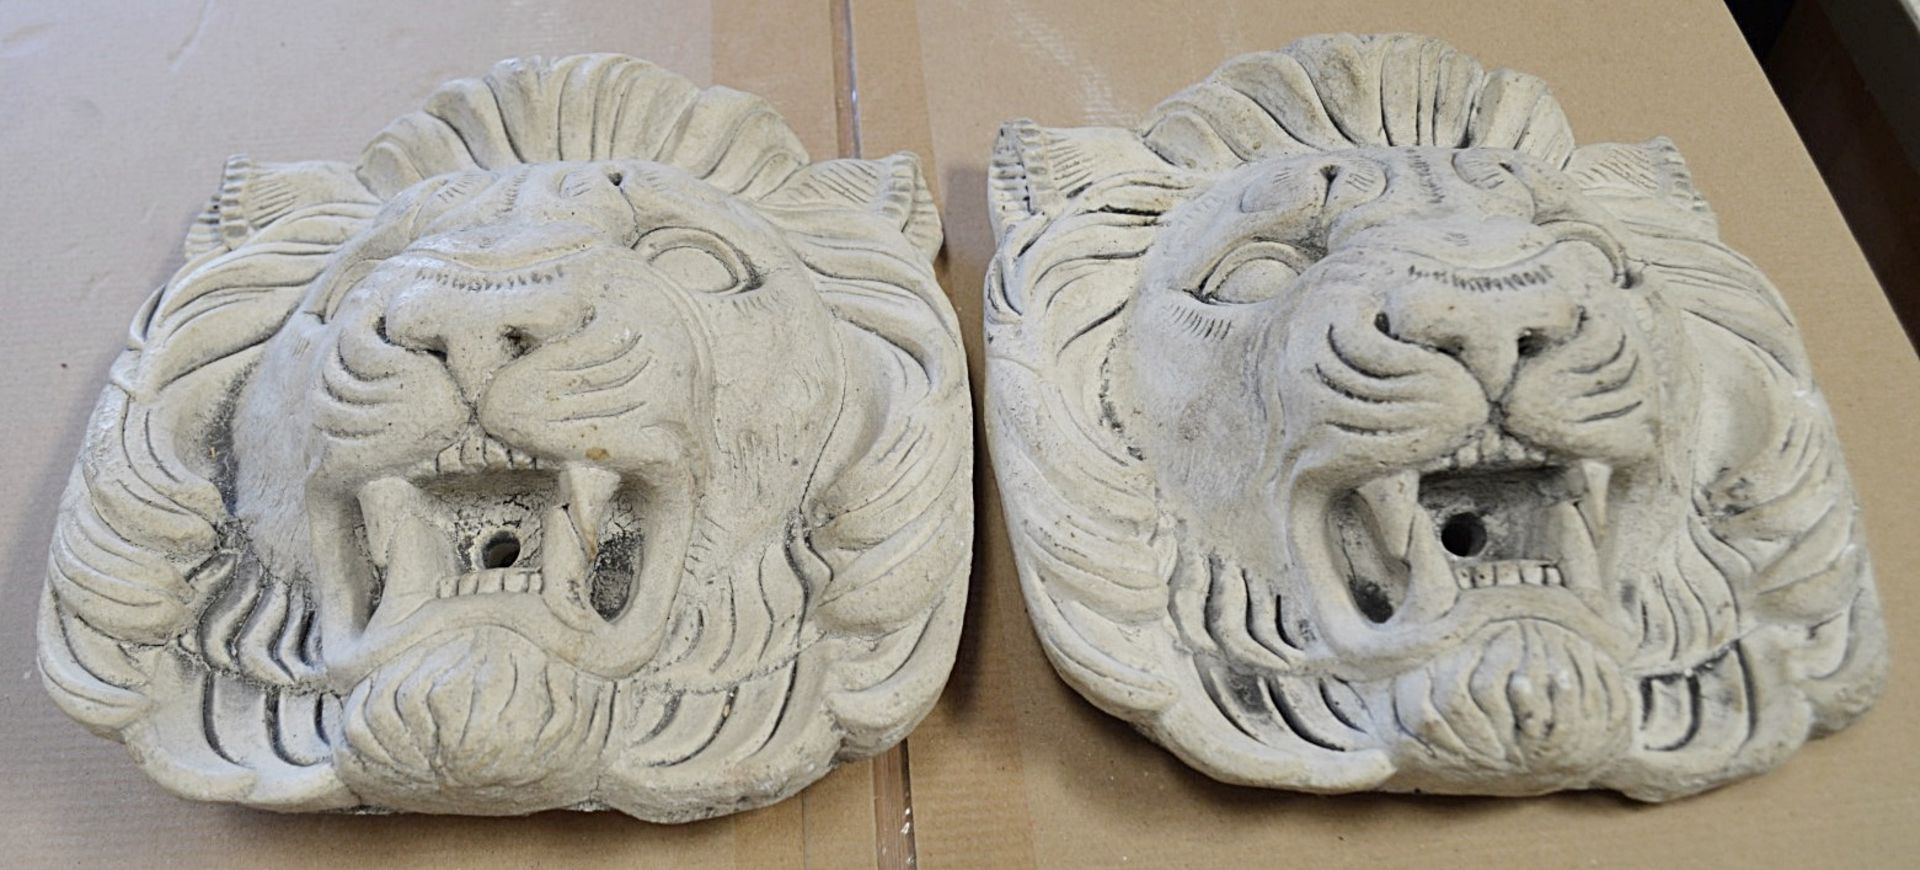 A Pair Of Ornamental Plaster Lion / Gargoyle Water Spouts - Dimensions: W25 x H25 x D10cm - Used, In